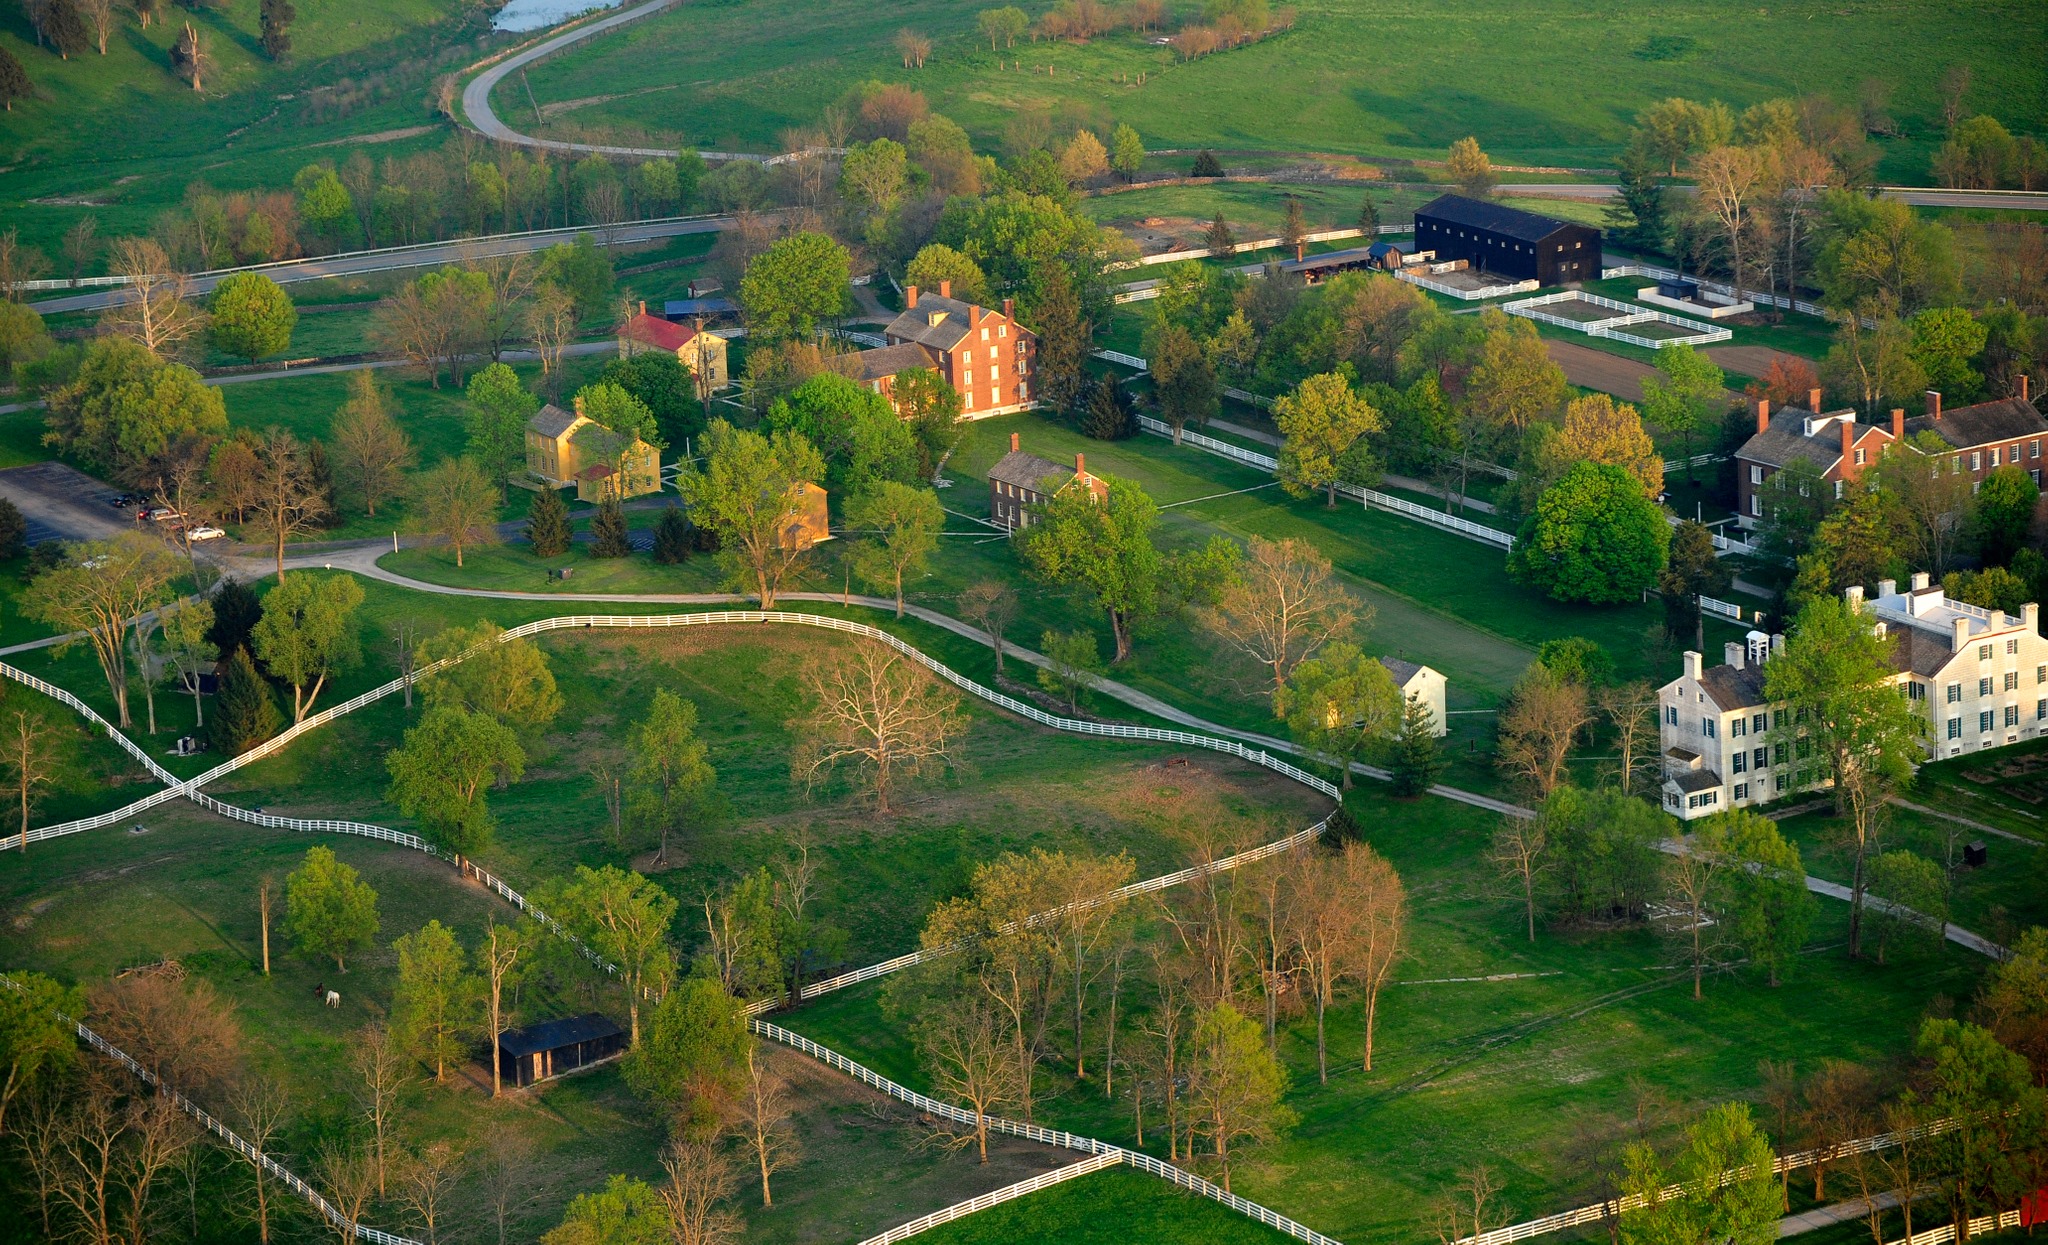 A bird's eye view photo of Shaker Village at Pleasant Hill Kentucky